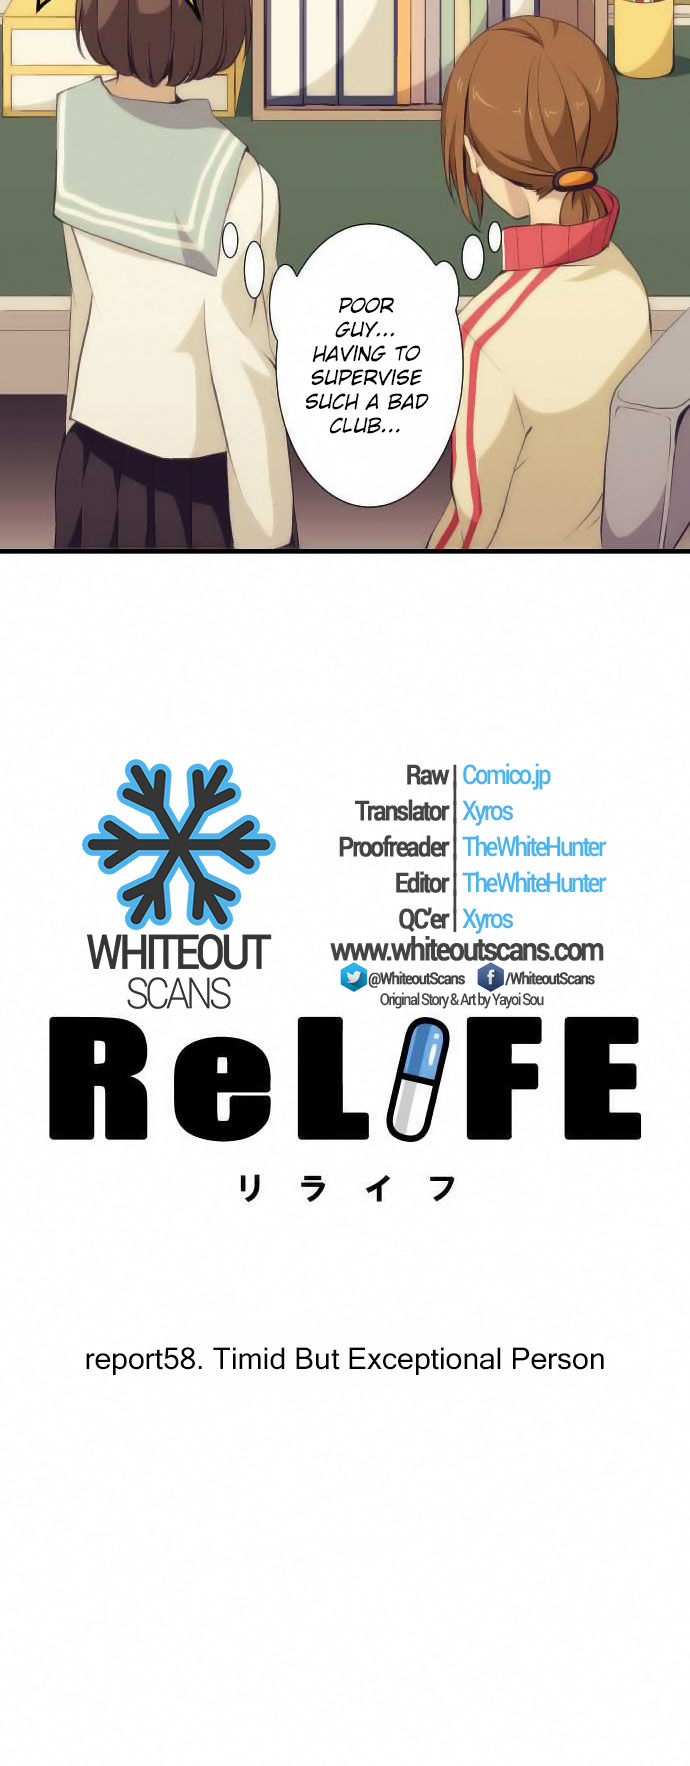 ReLIFE 58